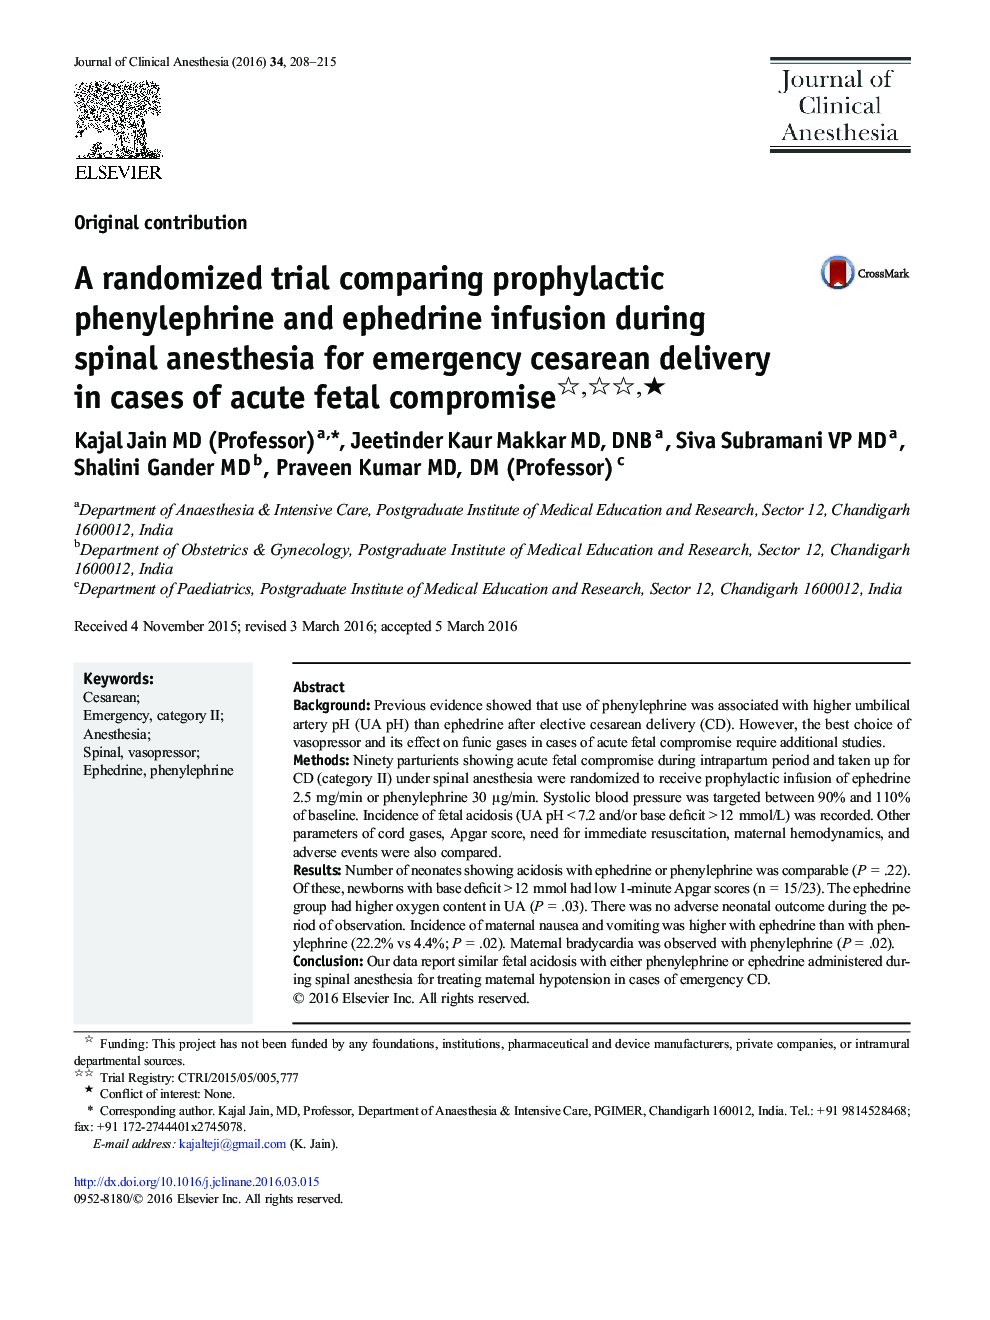 A randomized trial comparing prophylactic phenylephrine and ephedrine infusion during spinal anesthesia for emergency cesarean delivery in cases of acute fetal compromise